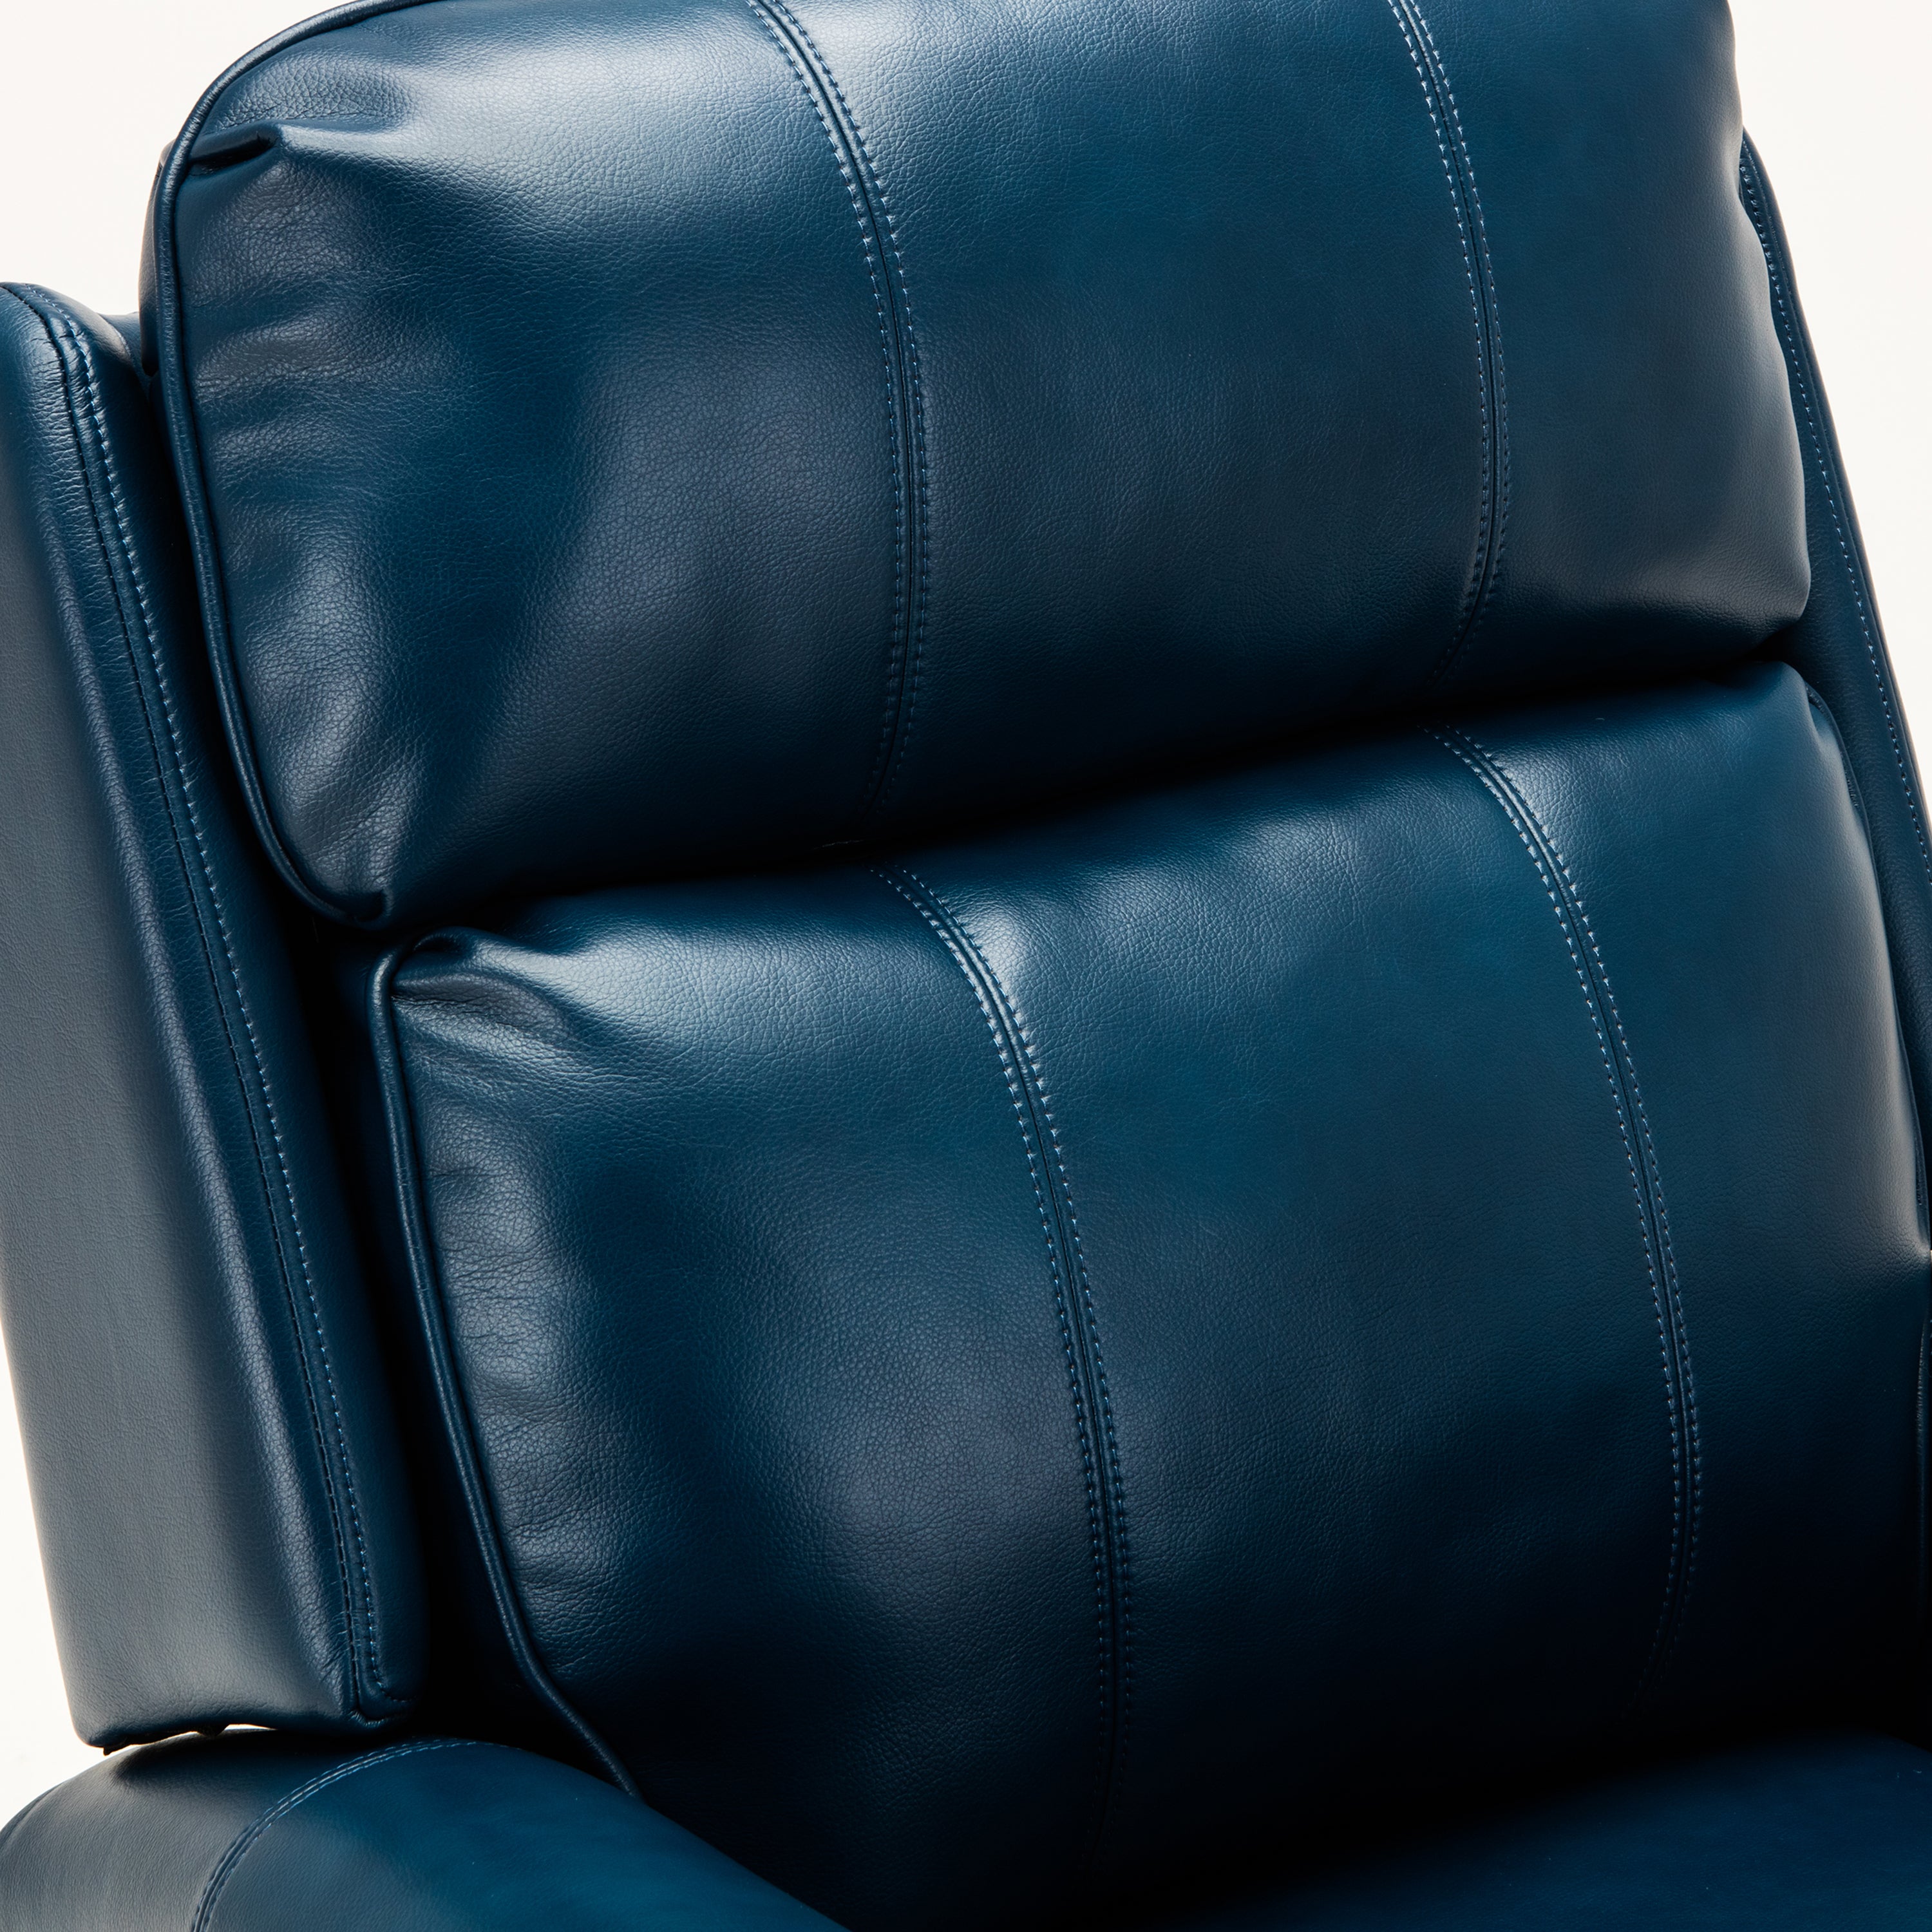 Landis Chair Navy Blue Lift Chair Recliner, seat back close up